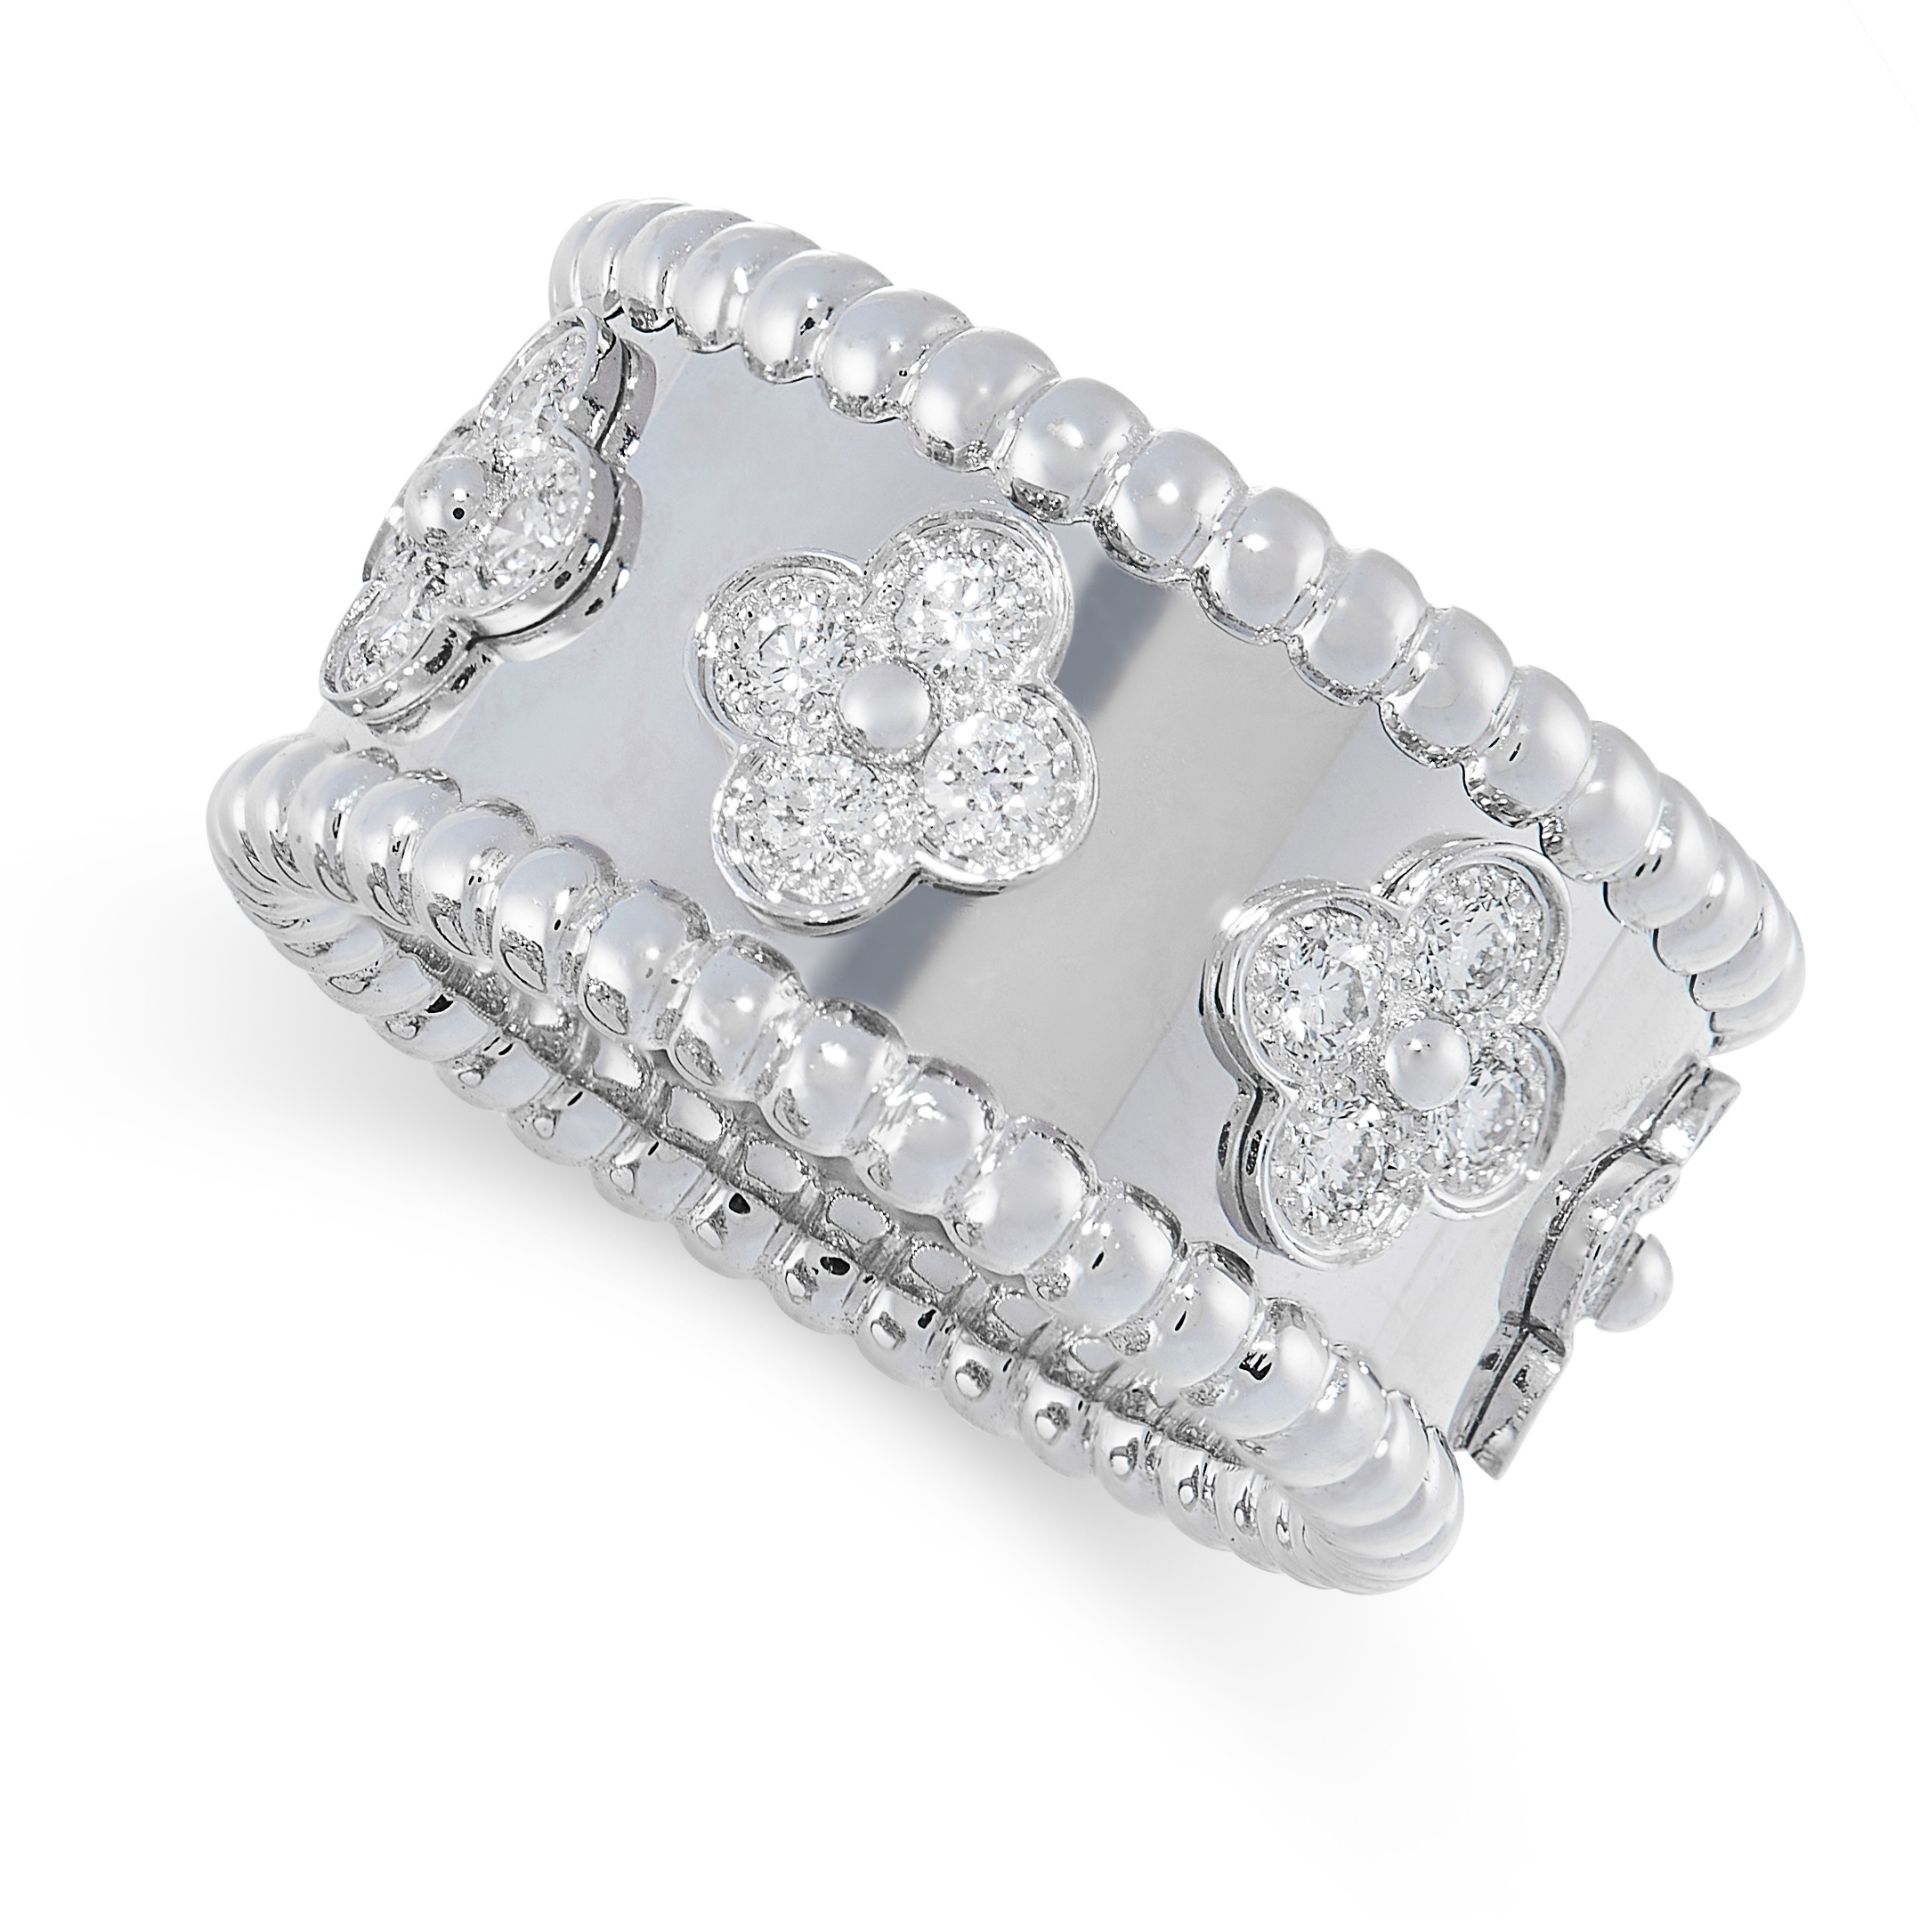 A DIAMOND PERLEE CLOVERS RING, VAN CLEEF & ARPELS in 18ct white gold, the band with seven quatrefoil